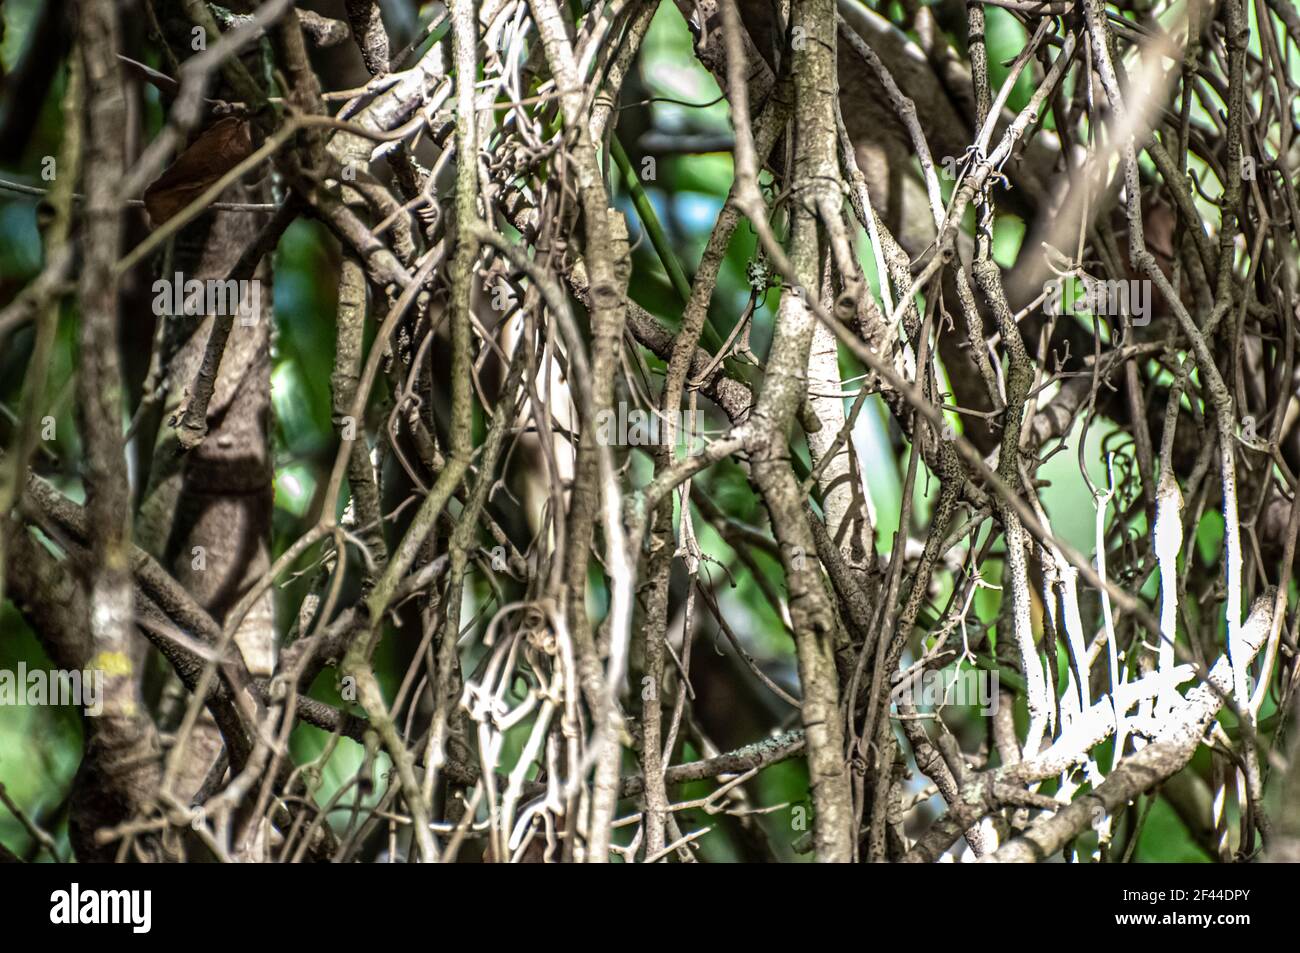 Abstract foliage close up of tangled twigs, branches and leaves Stock Photo